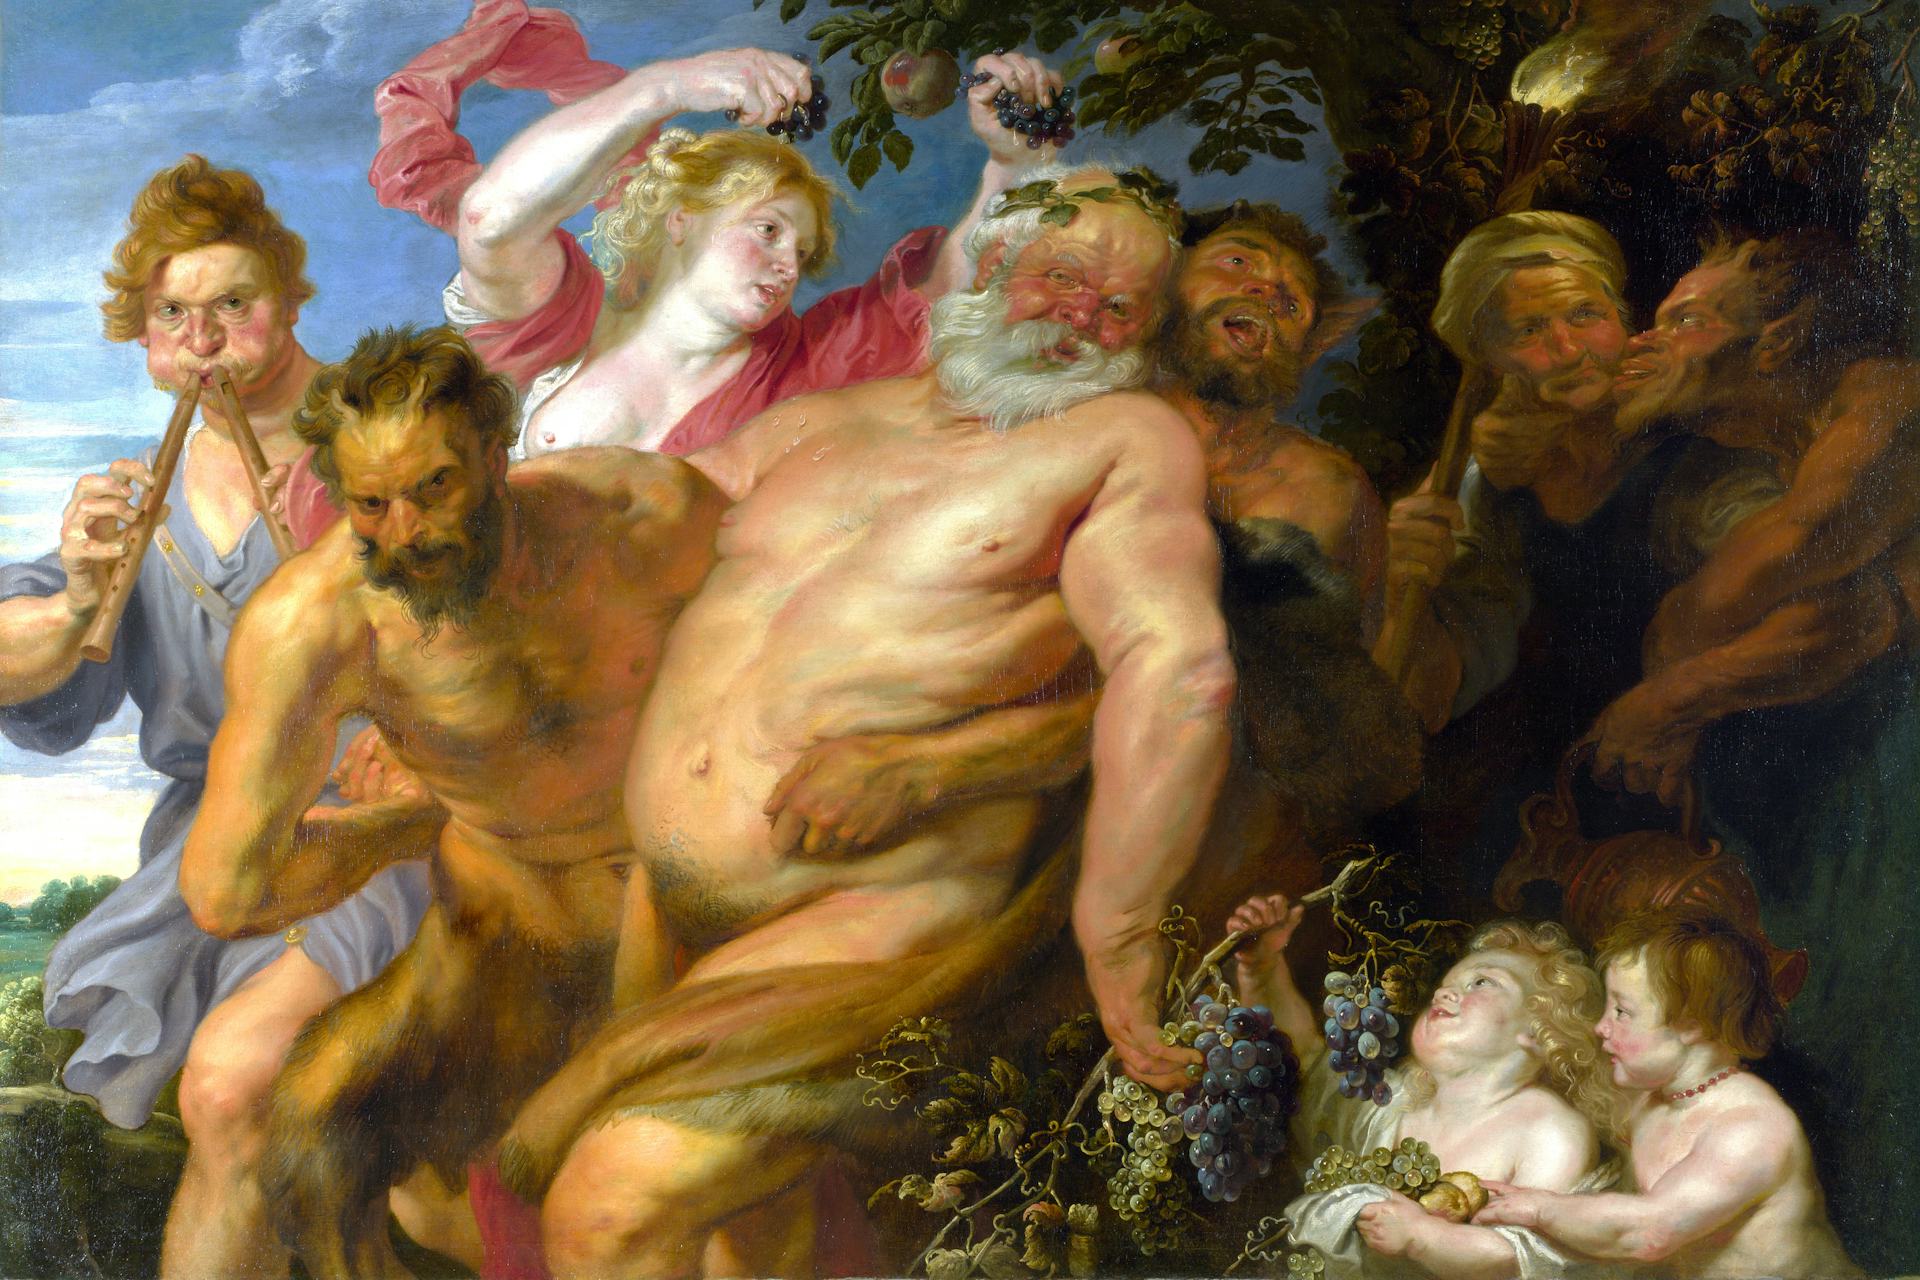 Drunken Silenus supported by Satyrs attributed to Anthony van Dyck (ca. 1620)